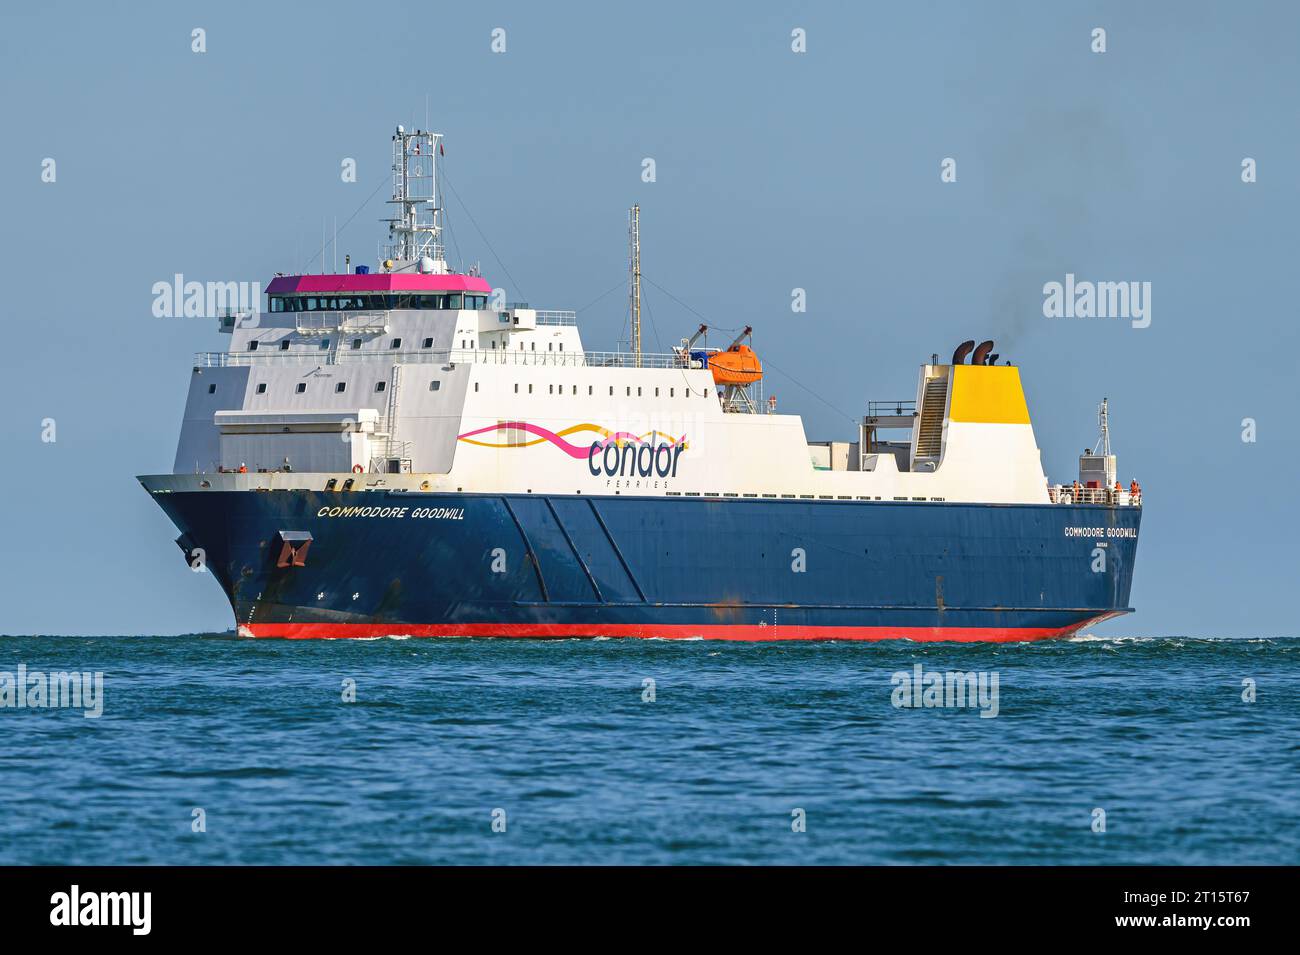 Commodore Goodwill is a RO-RO ferry operated by Condor Ferries between Portsmouth and the Channel Islands - September 2023. Stock Photo